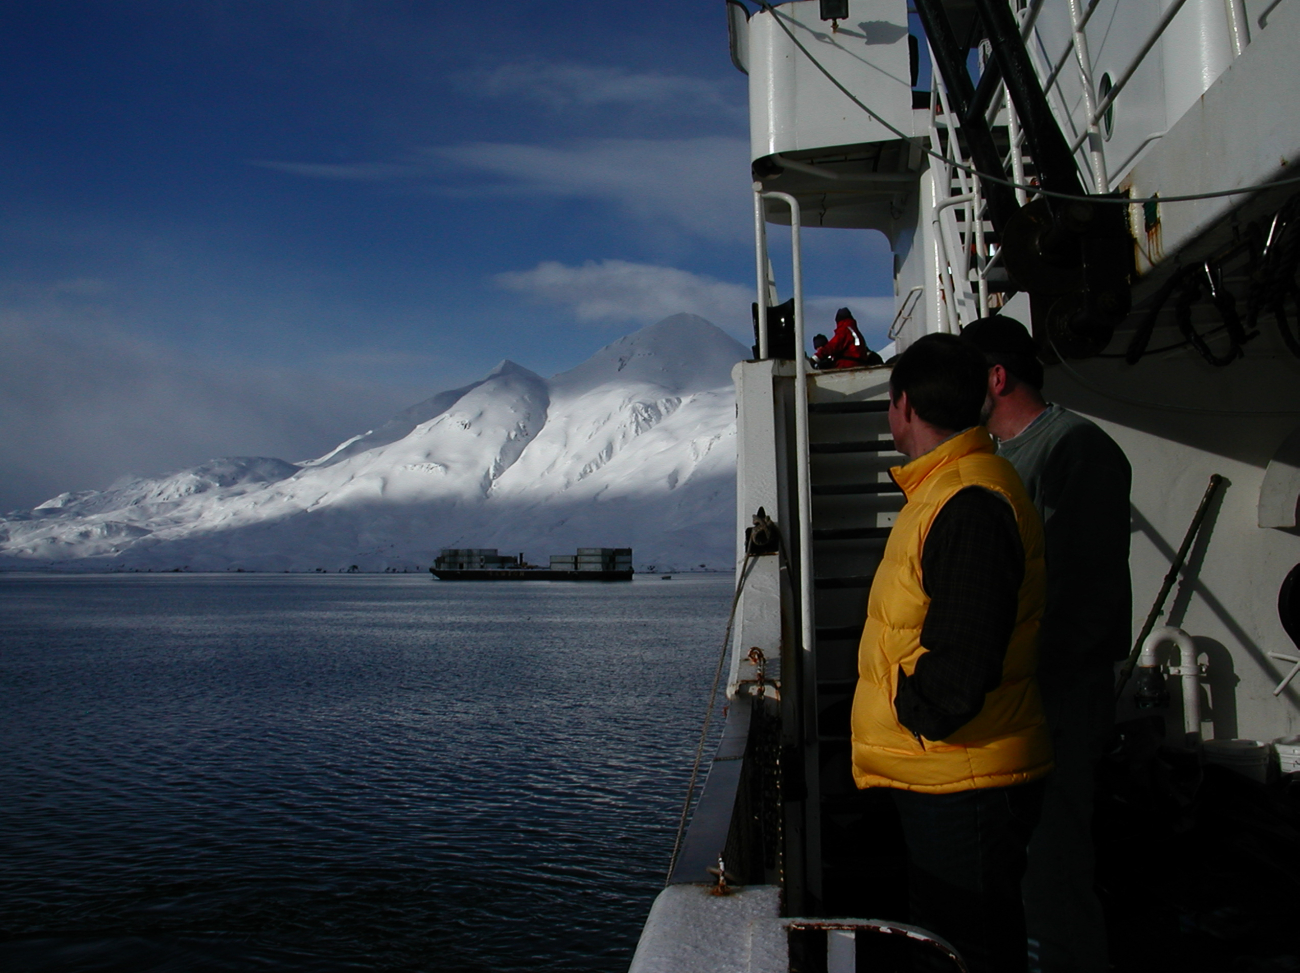 Coming into Dutch Harbor on the NOAA Ship MILLER FREEMAN in the winter